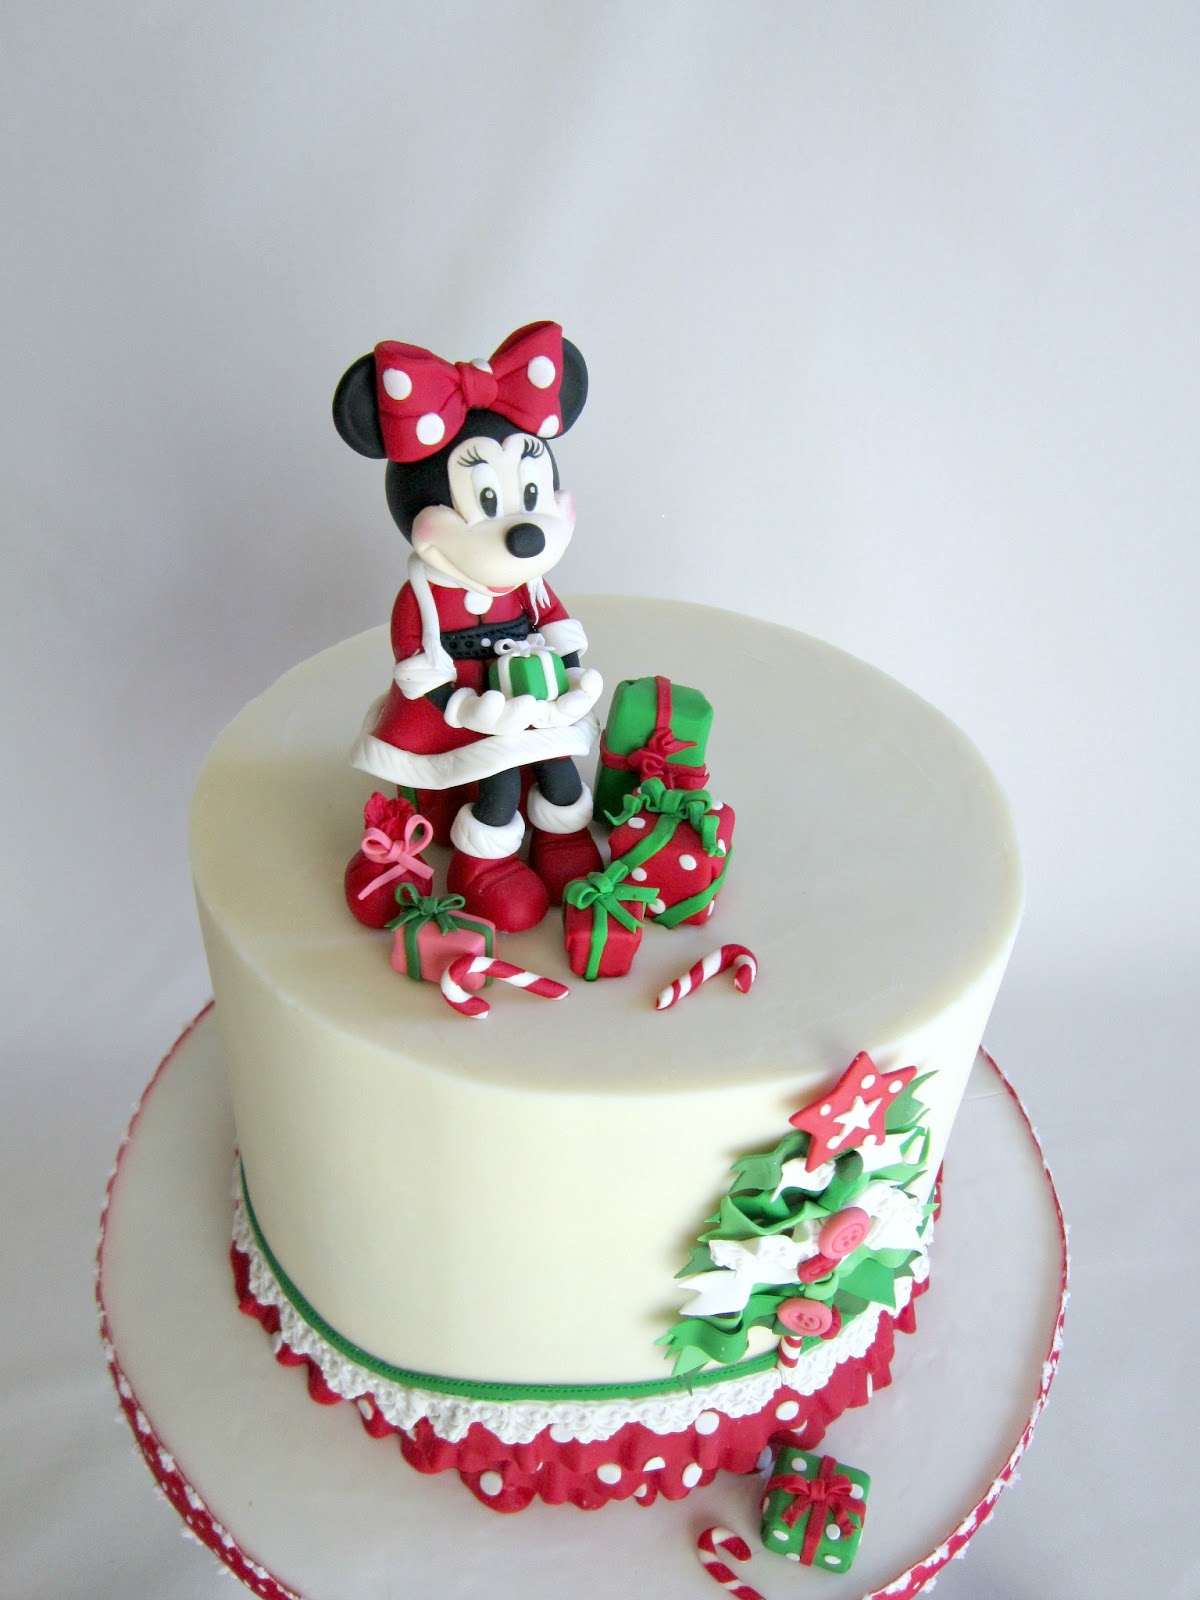 Delectable Cakes: Adorable Minnie Mouse 'Christmas ...